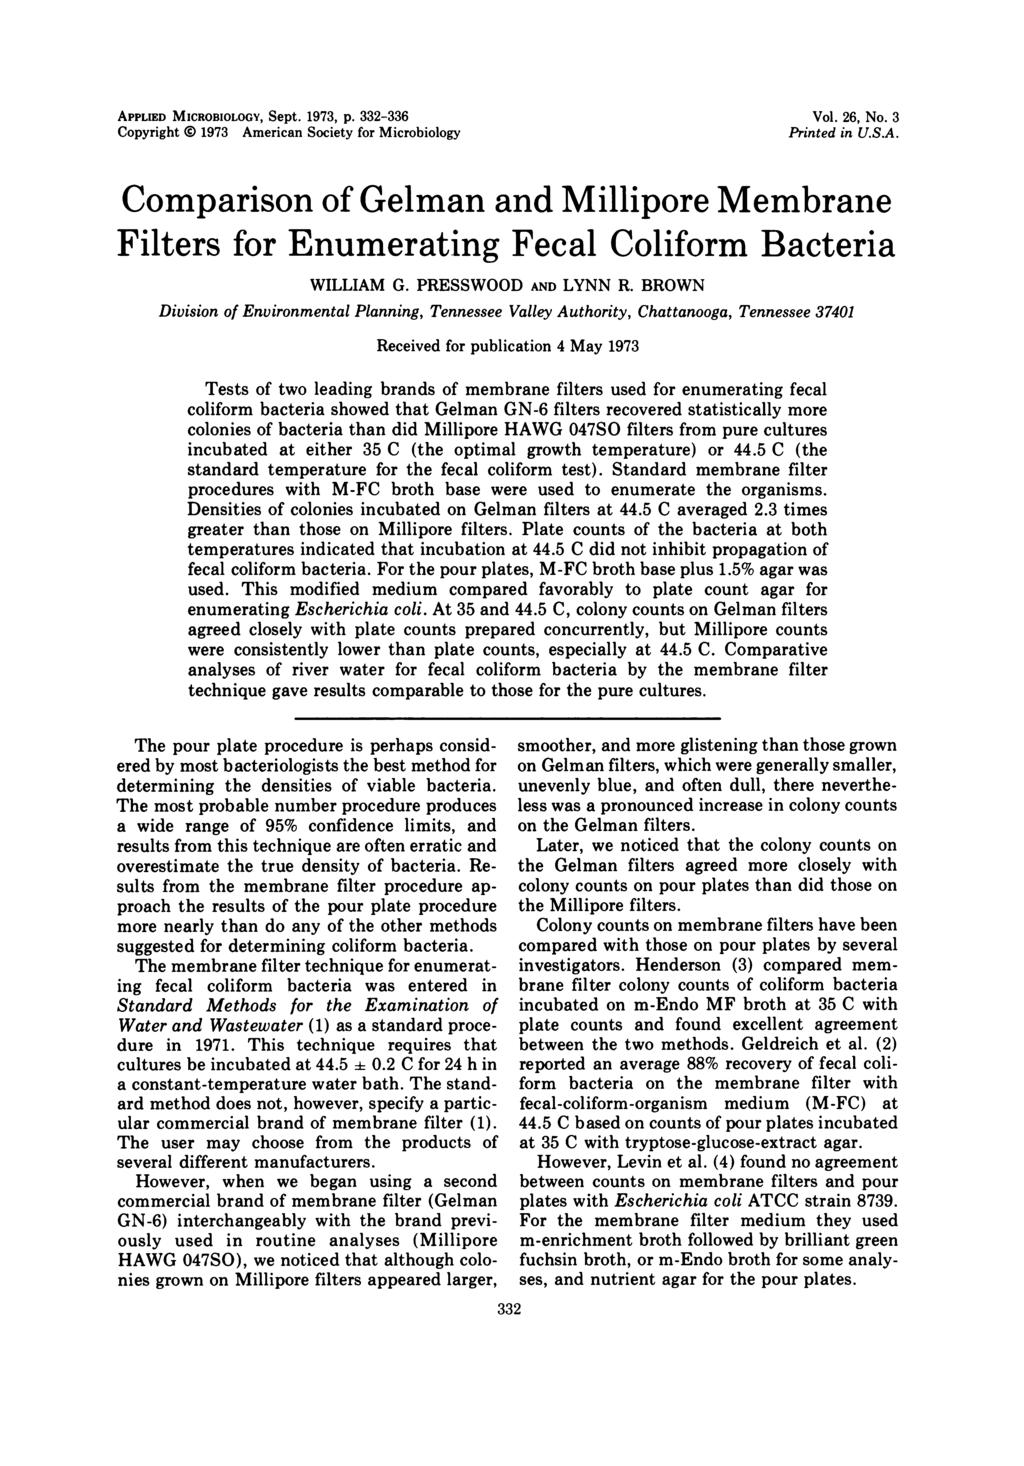 APPLIED MICROBIOLOGY, Sept. 1973, p. 332-336 Copyright 0 1973 American Society for Microbiology Vol. 26, No. 3 Printed in U.S.A. Comparison of Gelman and Millipore Membrane Filters for Enumerating Fecal Coliform Bacteria WILLIAM G.